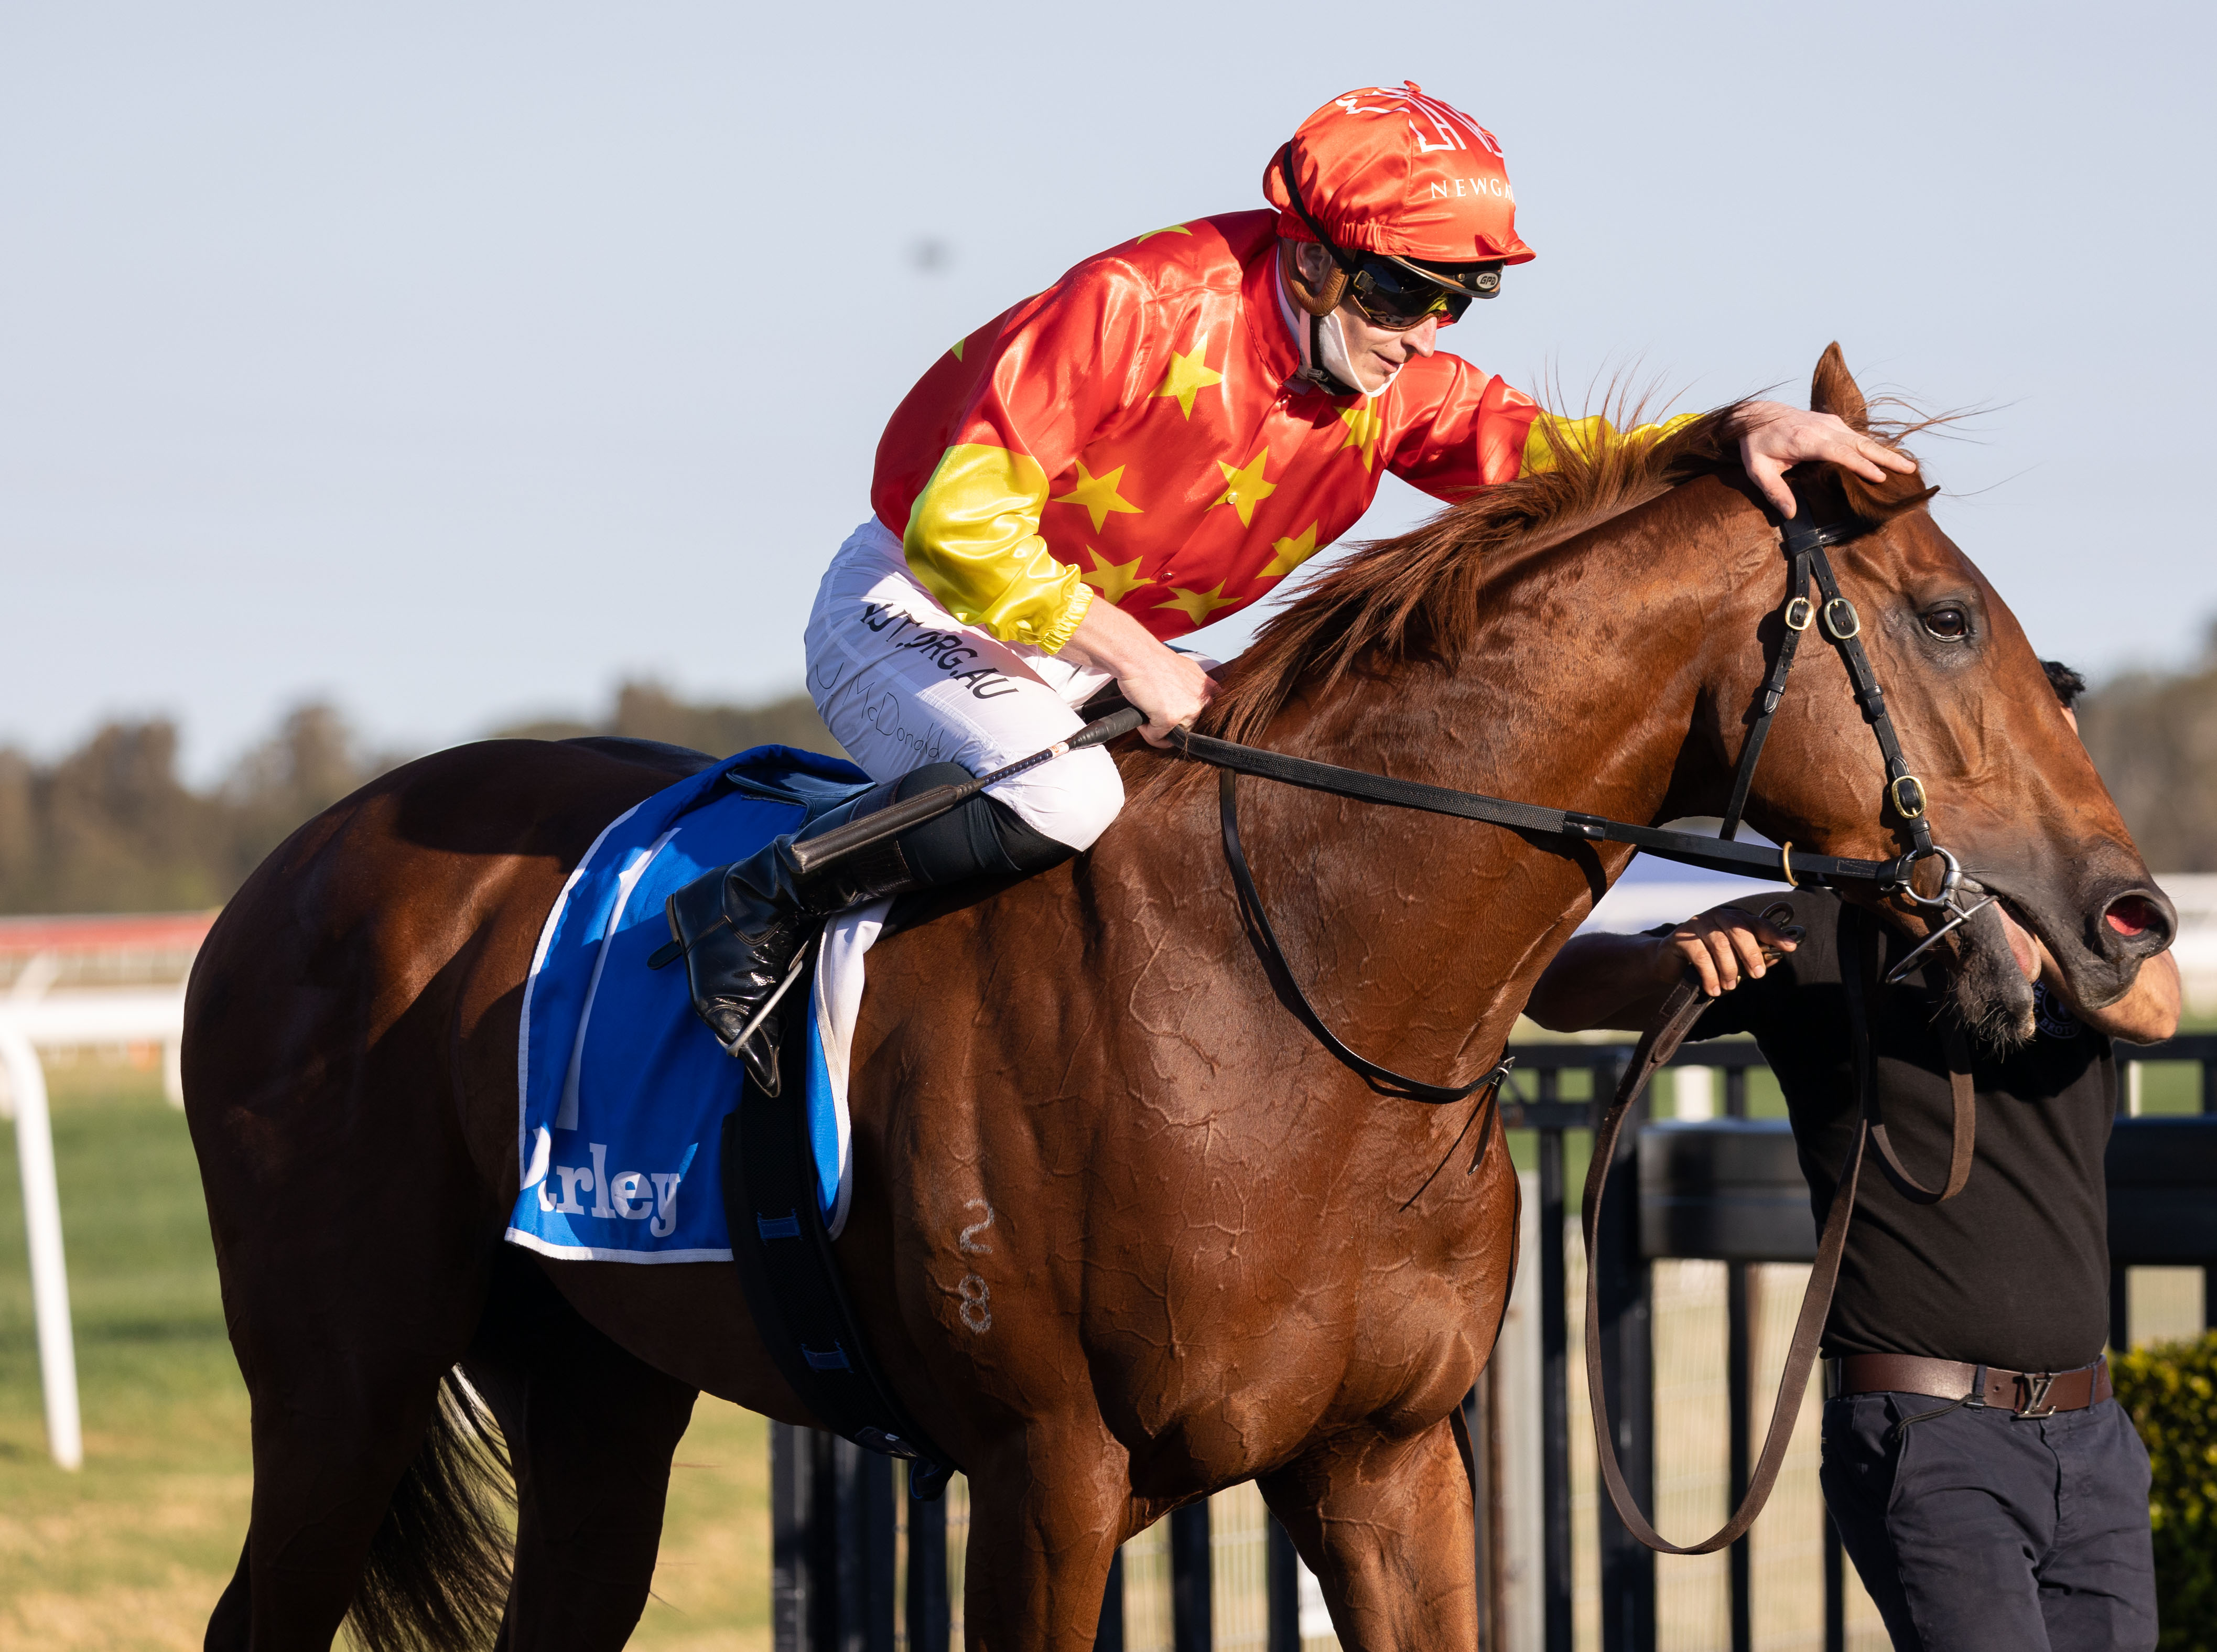 Tiger Of Malay (James McDonald, inside, red cap) wins the Up & Coming Stakes (Group 3) at Kembla Grange on August 14, 2021 - photo by Martin King/Sportpix copyright